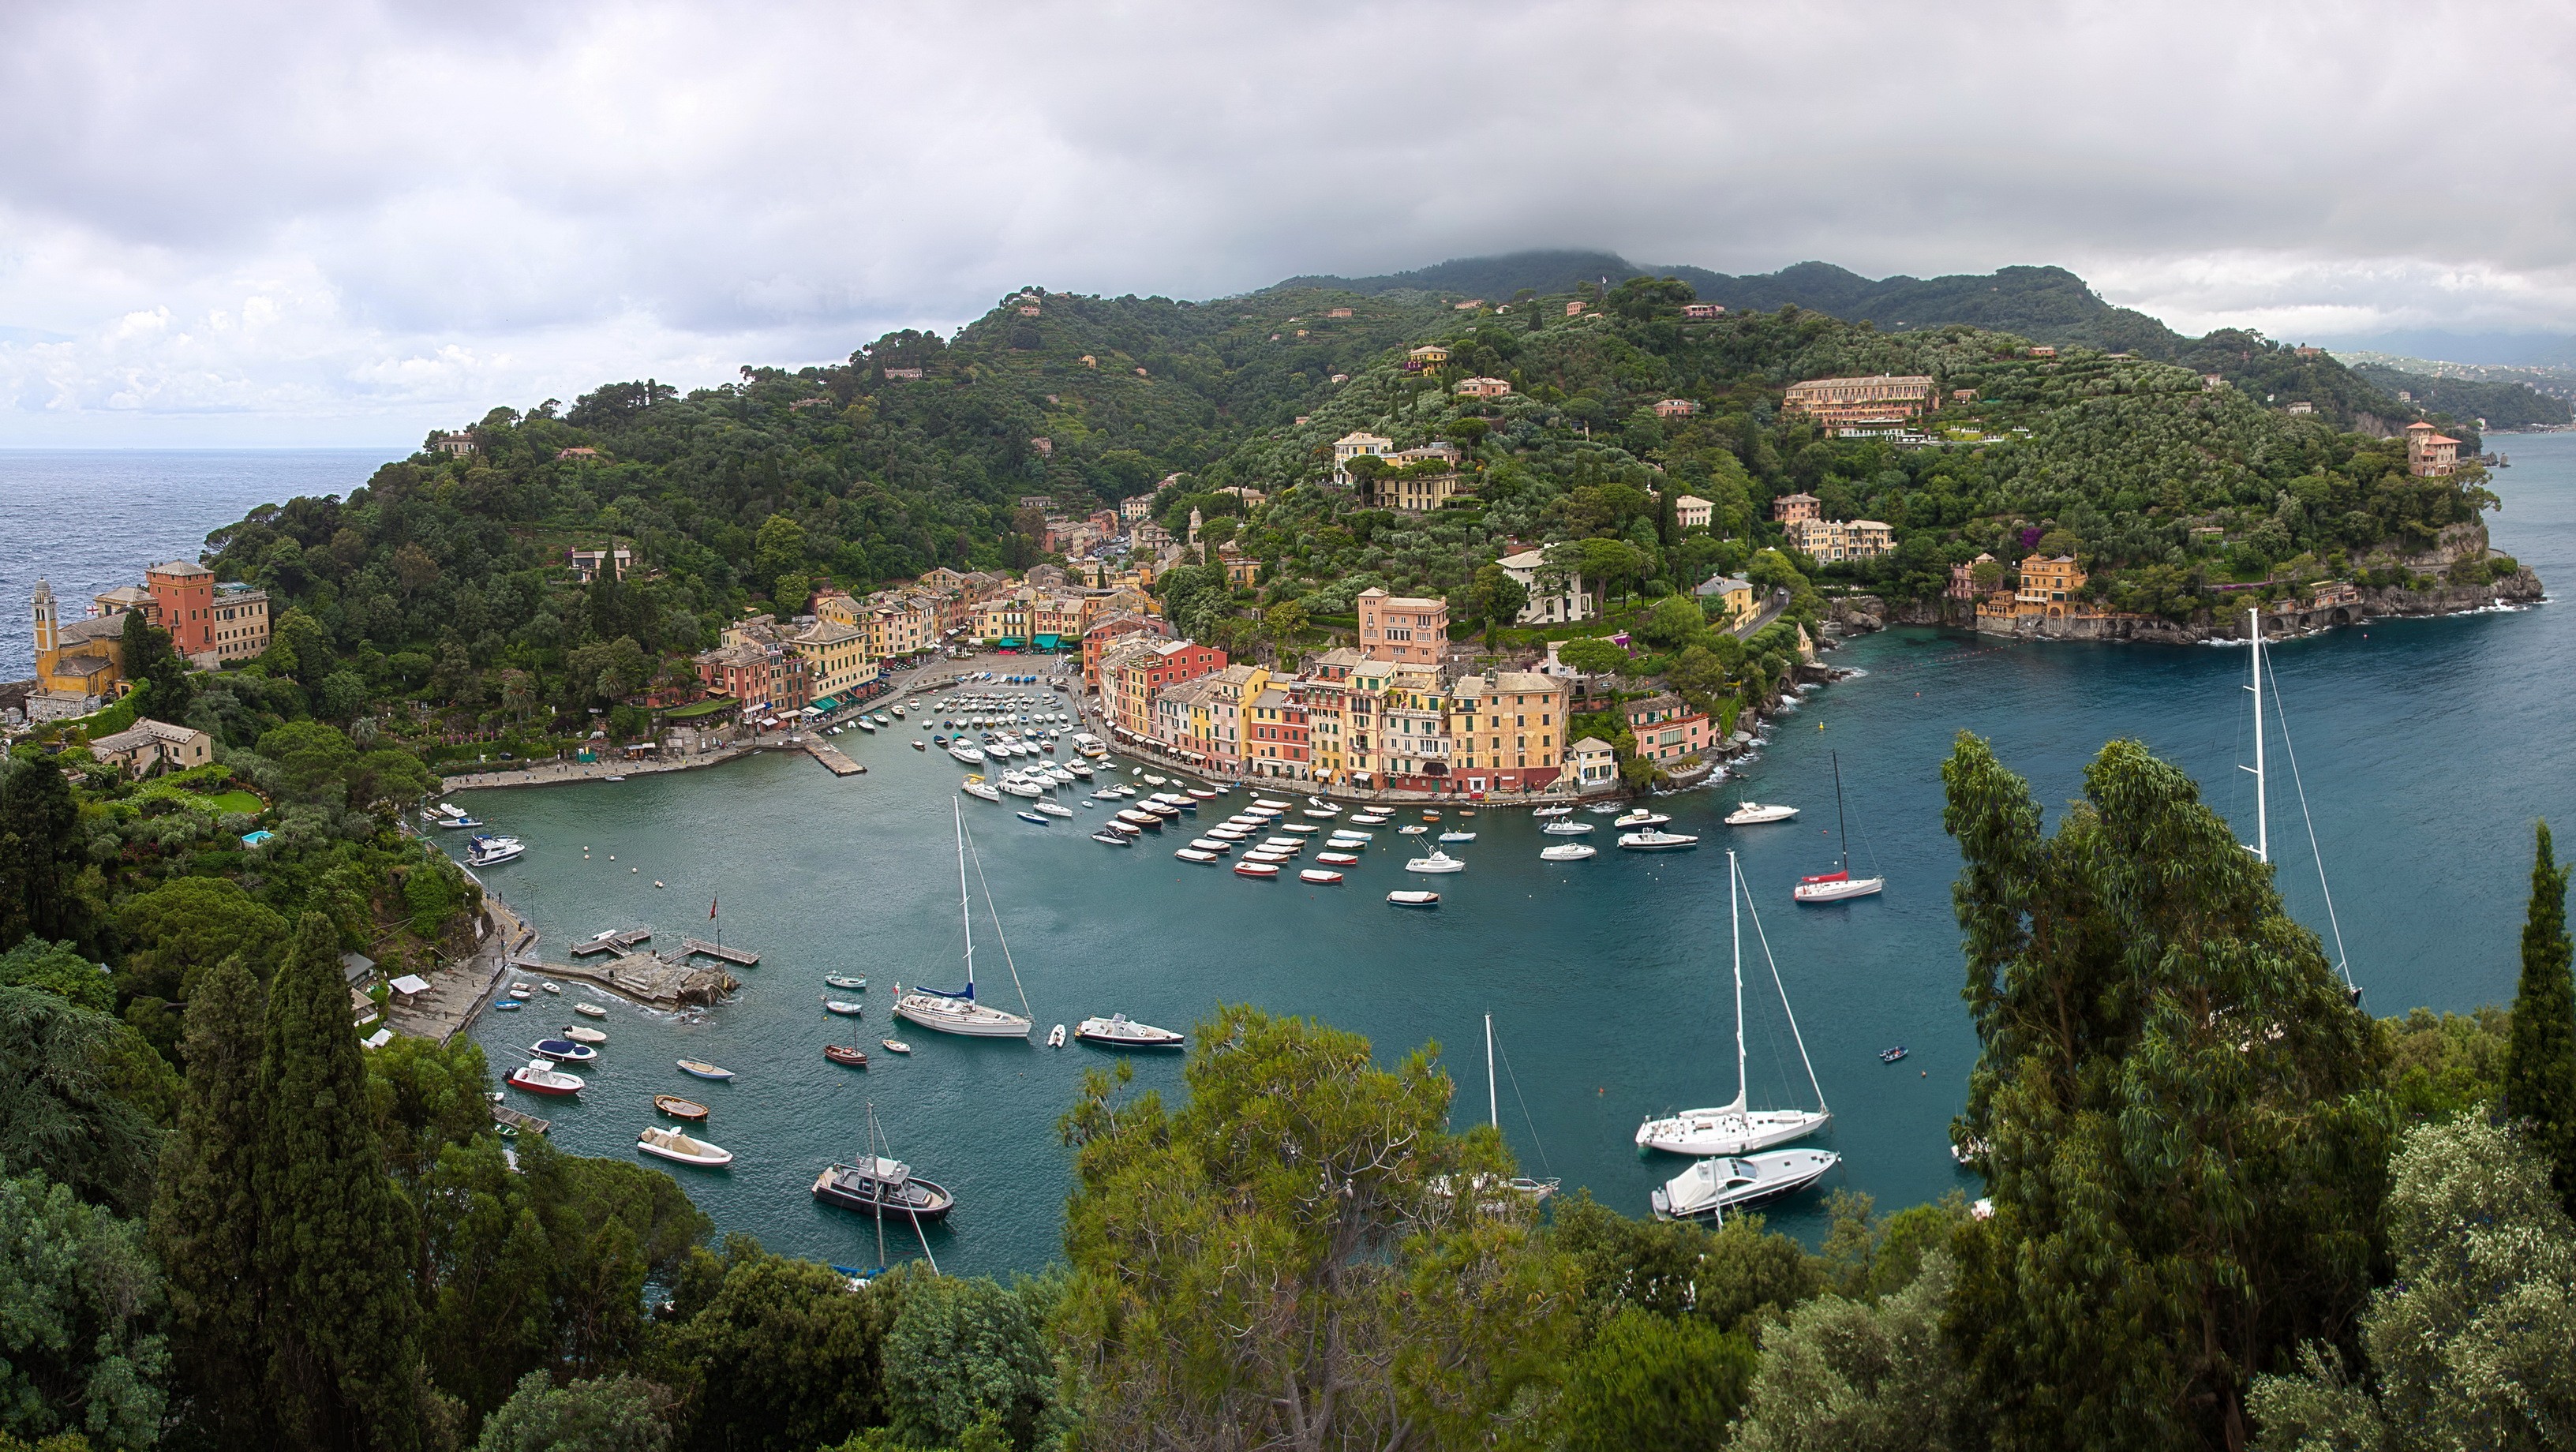 wallpapers city, man made, portofino, boat, forest, genoa, house, island, italy, liguria, village, water, towns